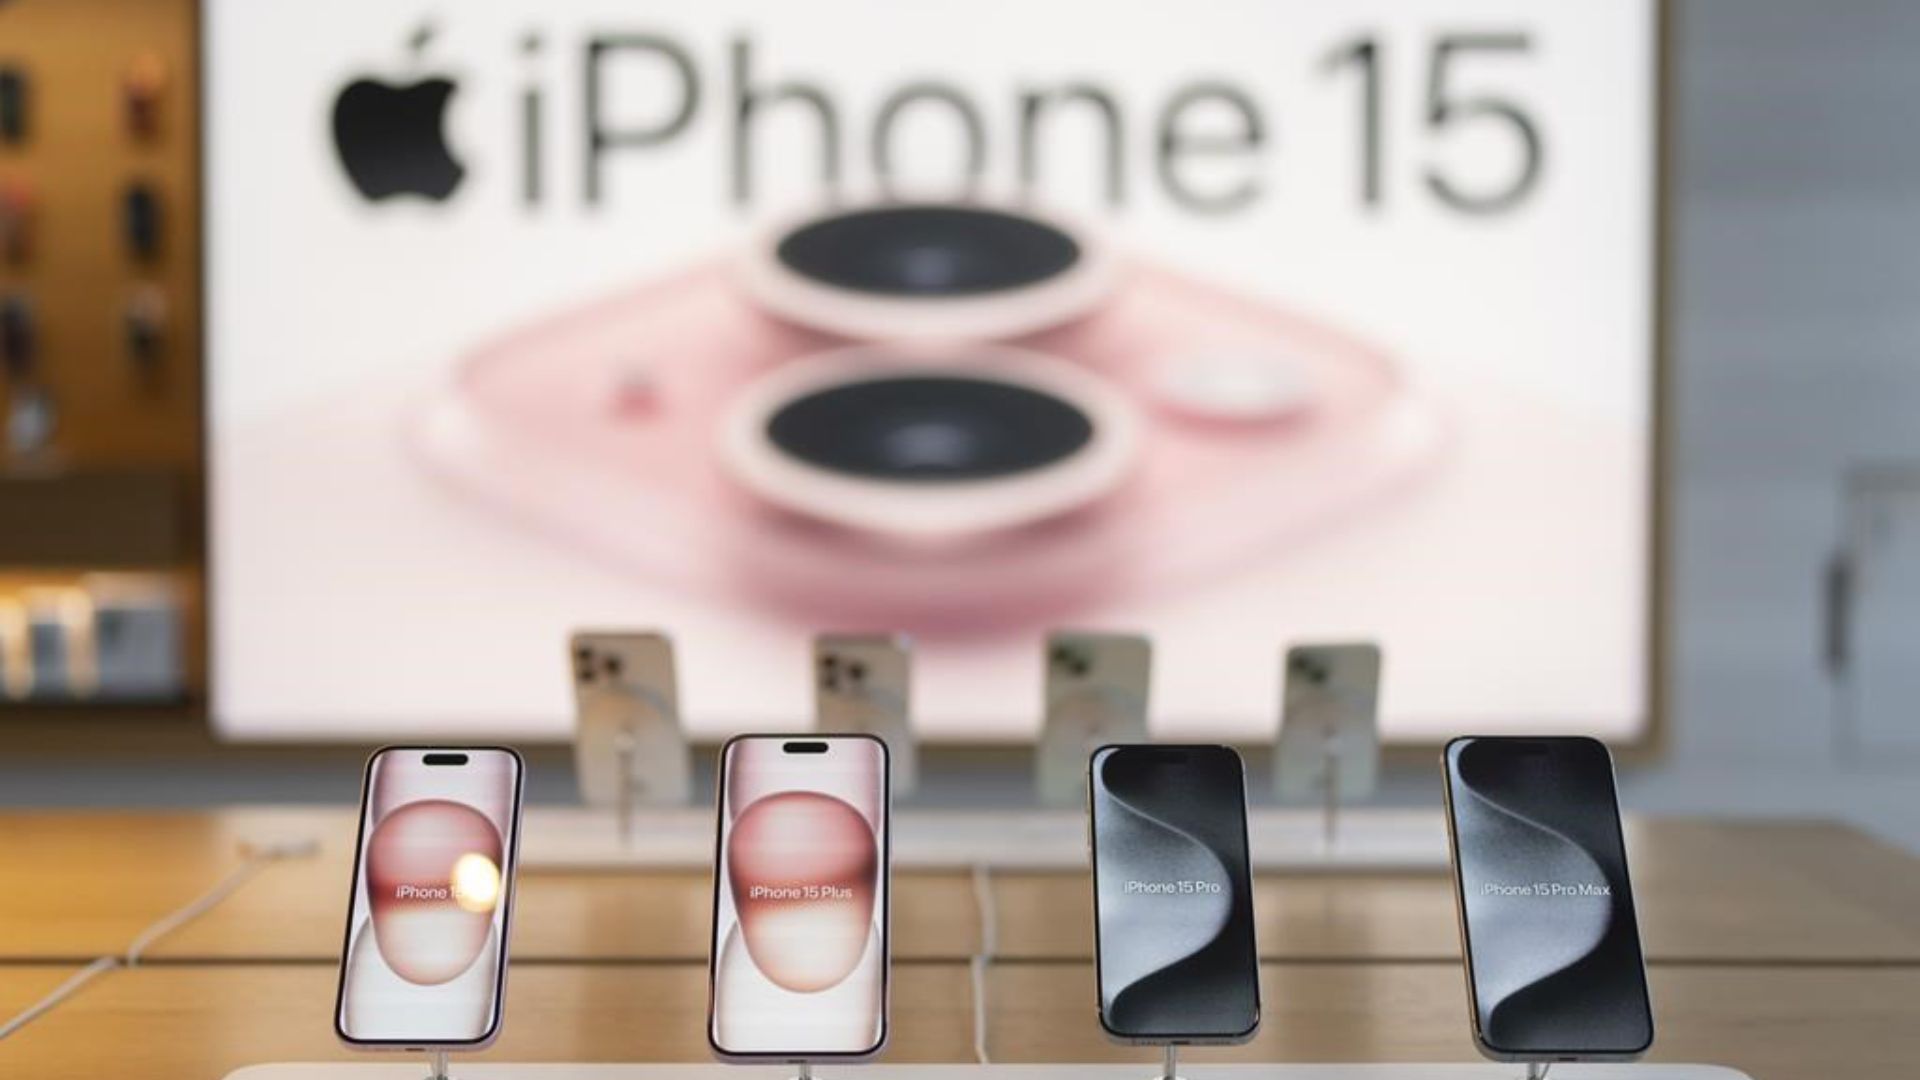 Apple will address the issue of the new iPhone 15 overheating